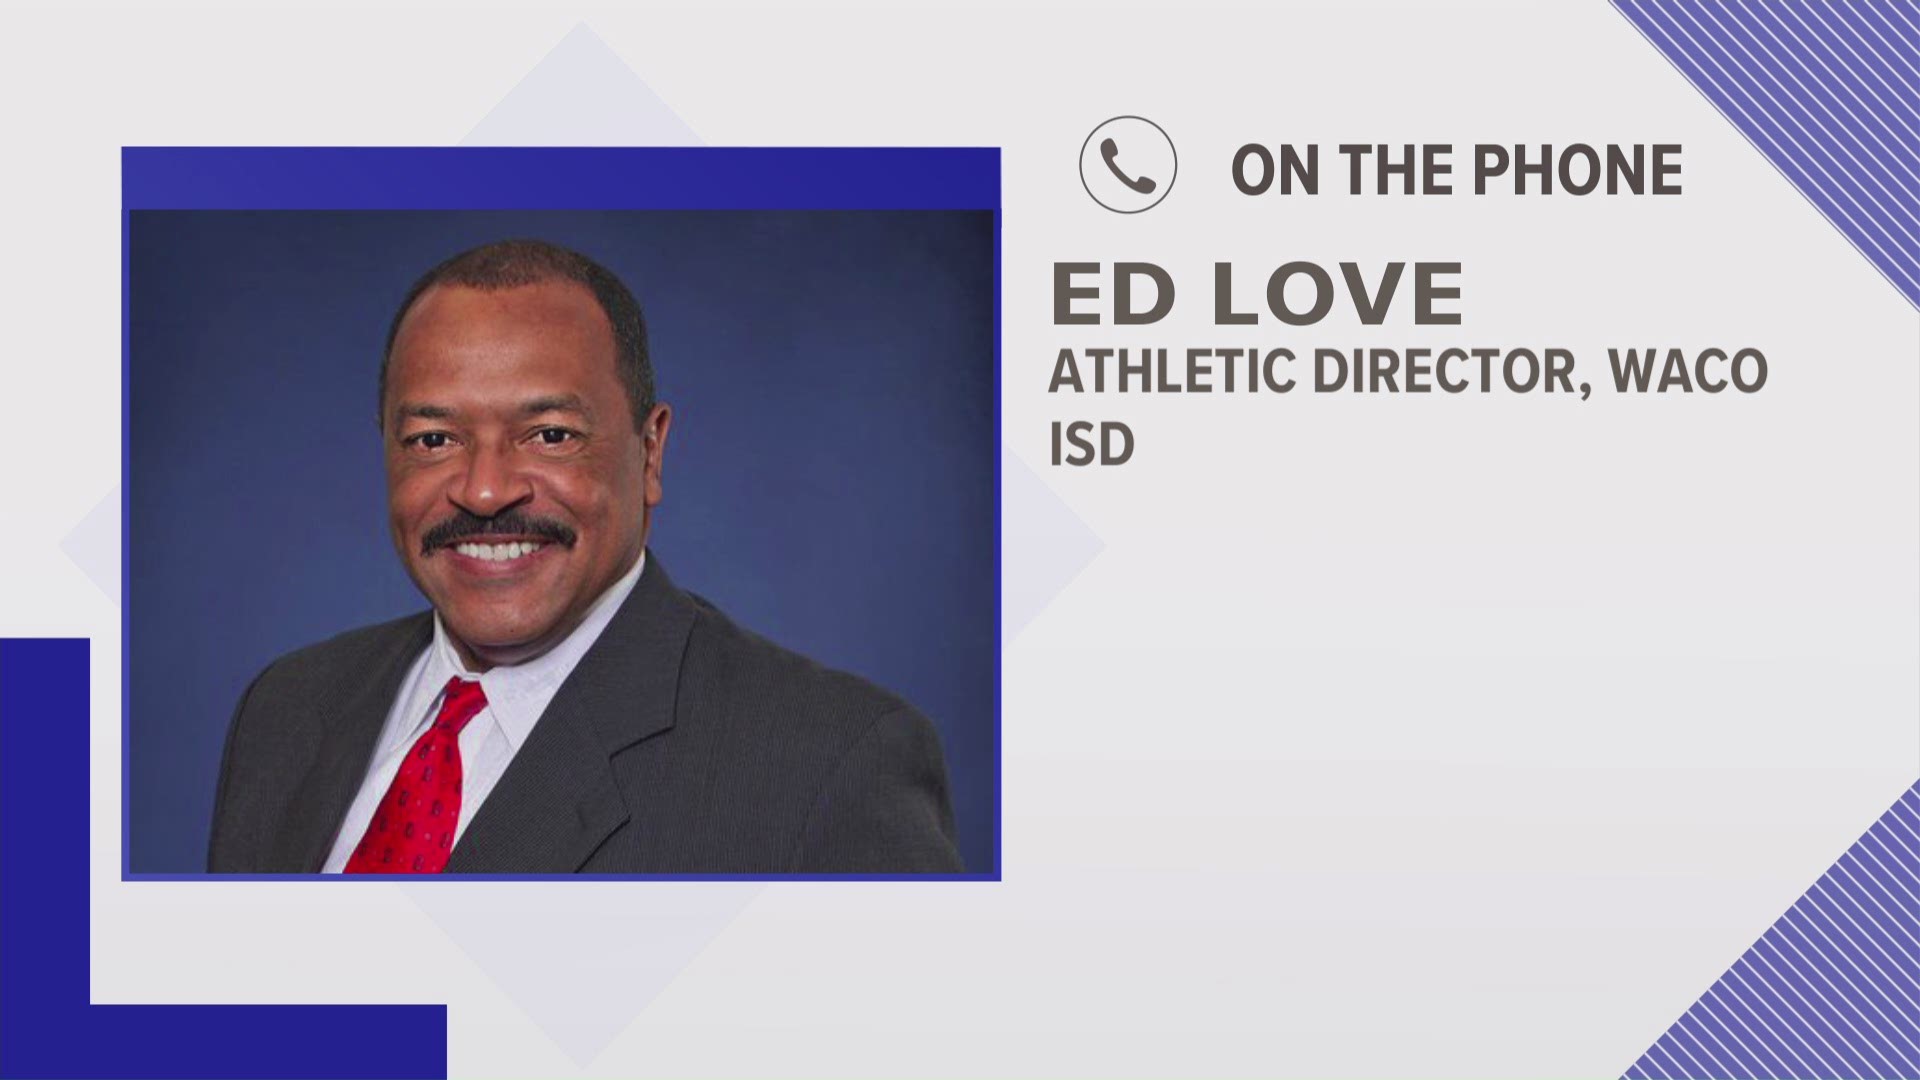 6 News weekend sports anchor Kurtis Quillin spoke with Waco ISD athletic director Ed Love about the district's decision to suspend summer workouts.